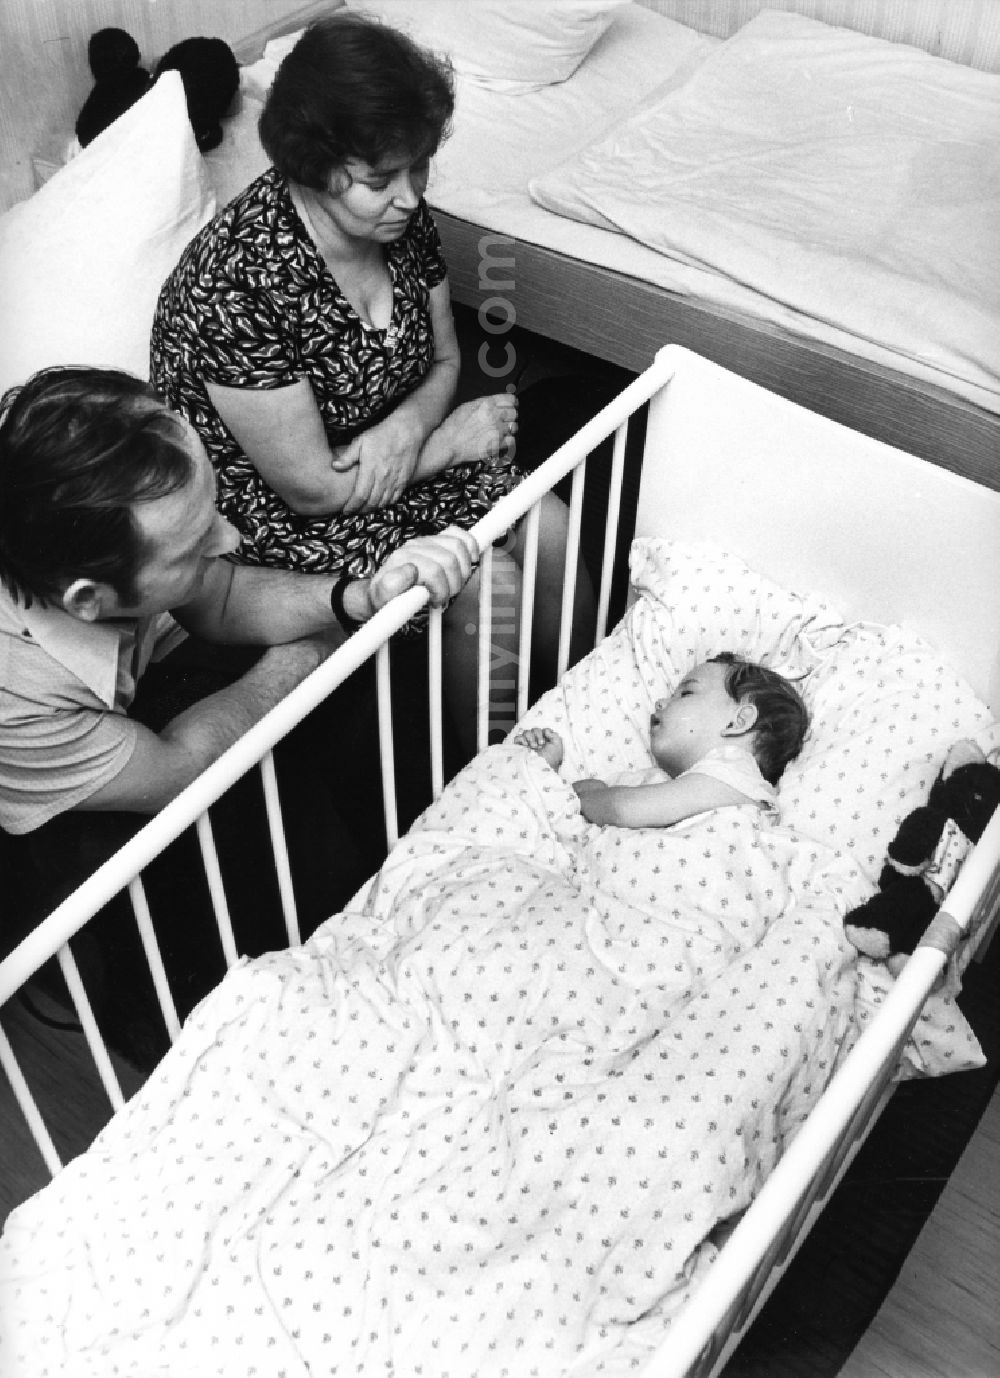 Boxberg/Oberlausitz: Parents sit in the cot of her sleeping child in Boxberg/Oberlausitz in the state Saxony on the territory of the former GDR, German Democratic Republic